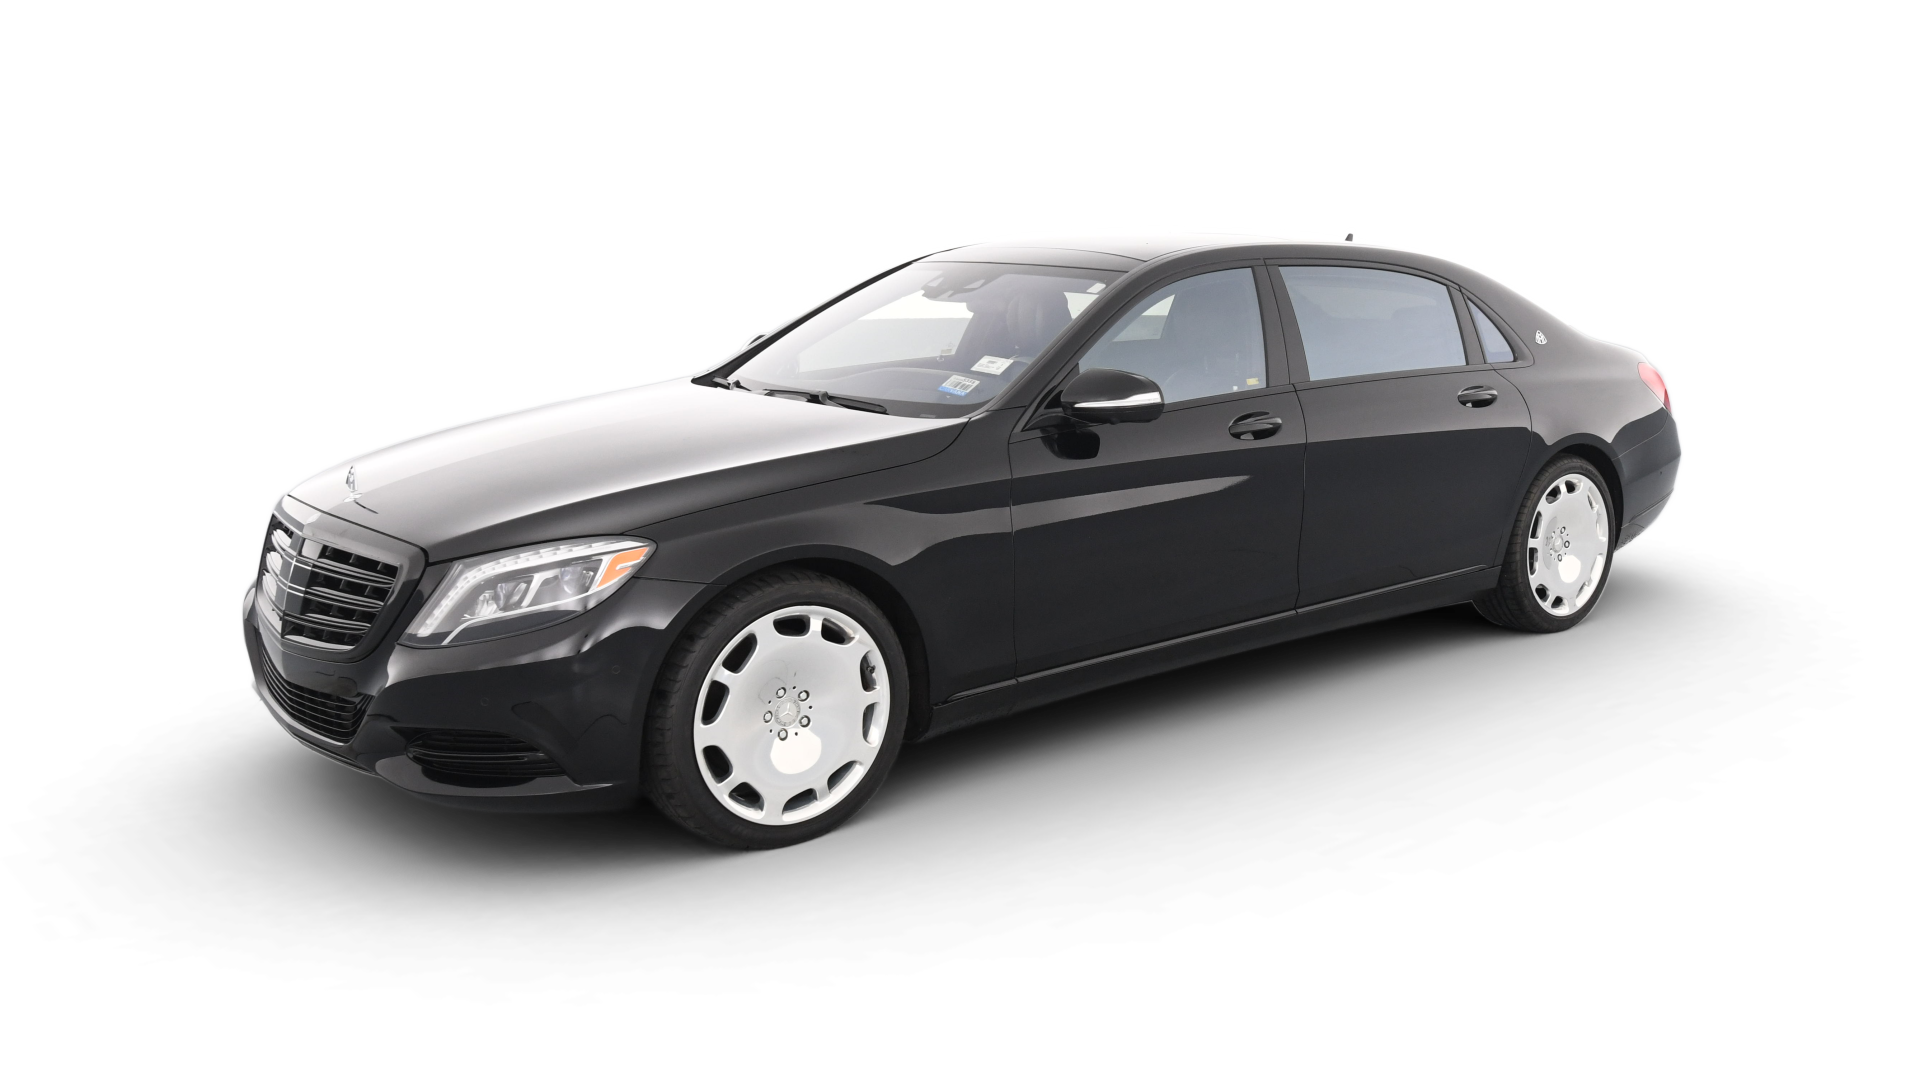 Mercedes-Benz Maybach S 600 model image.